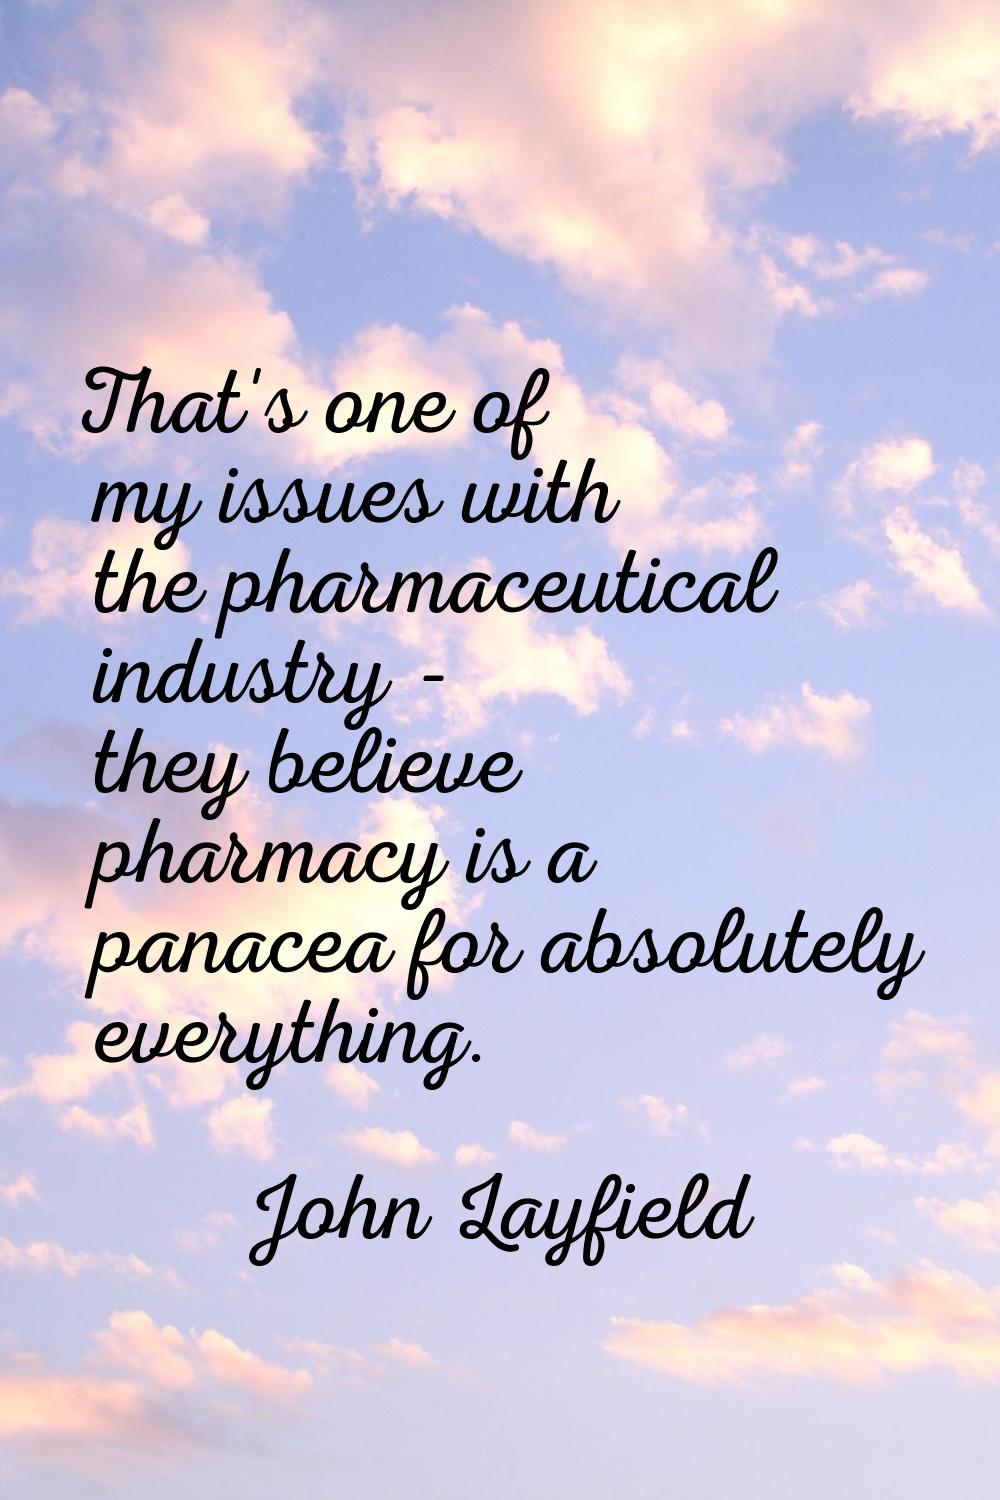 That's one of my issues with the pharmaceutical industry - they believe pharmacy is a panacea for a